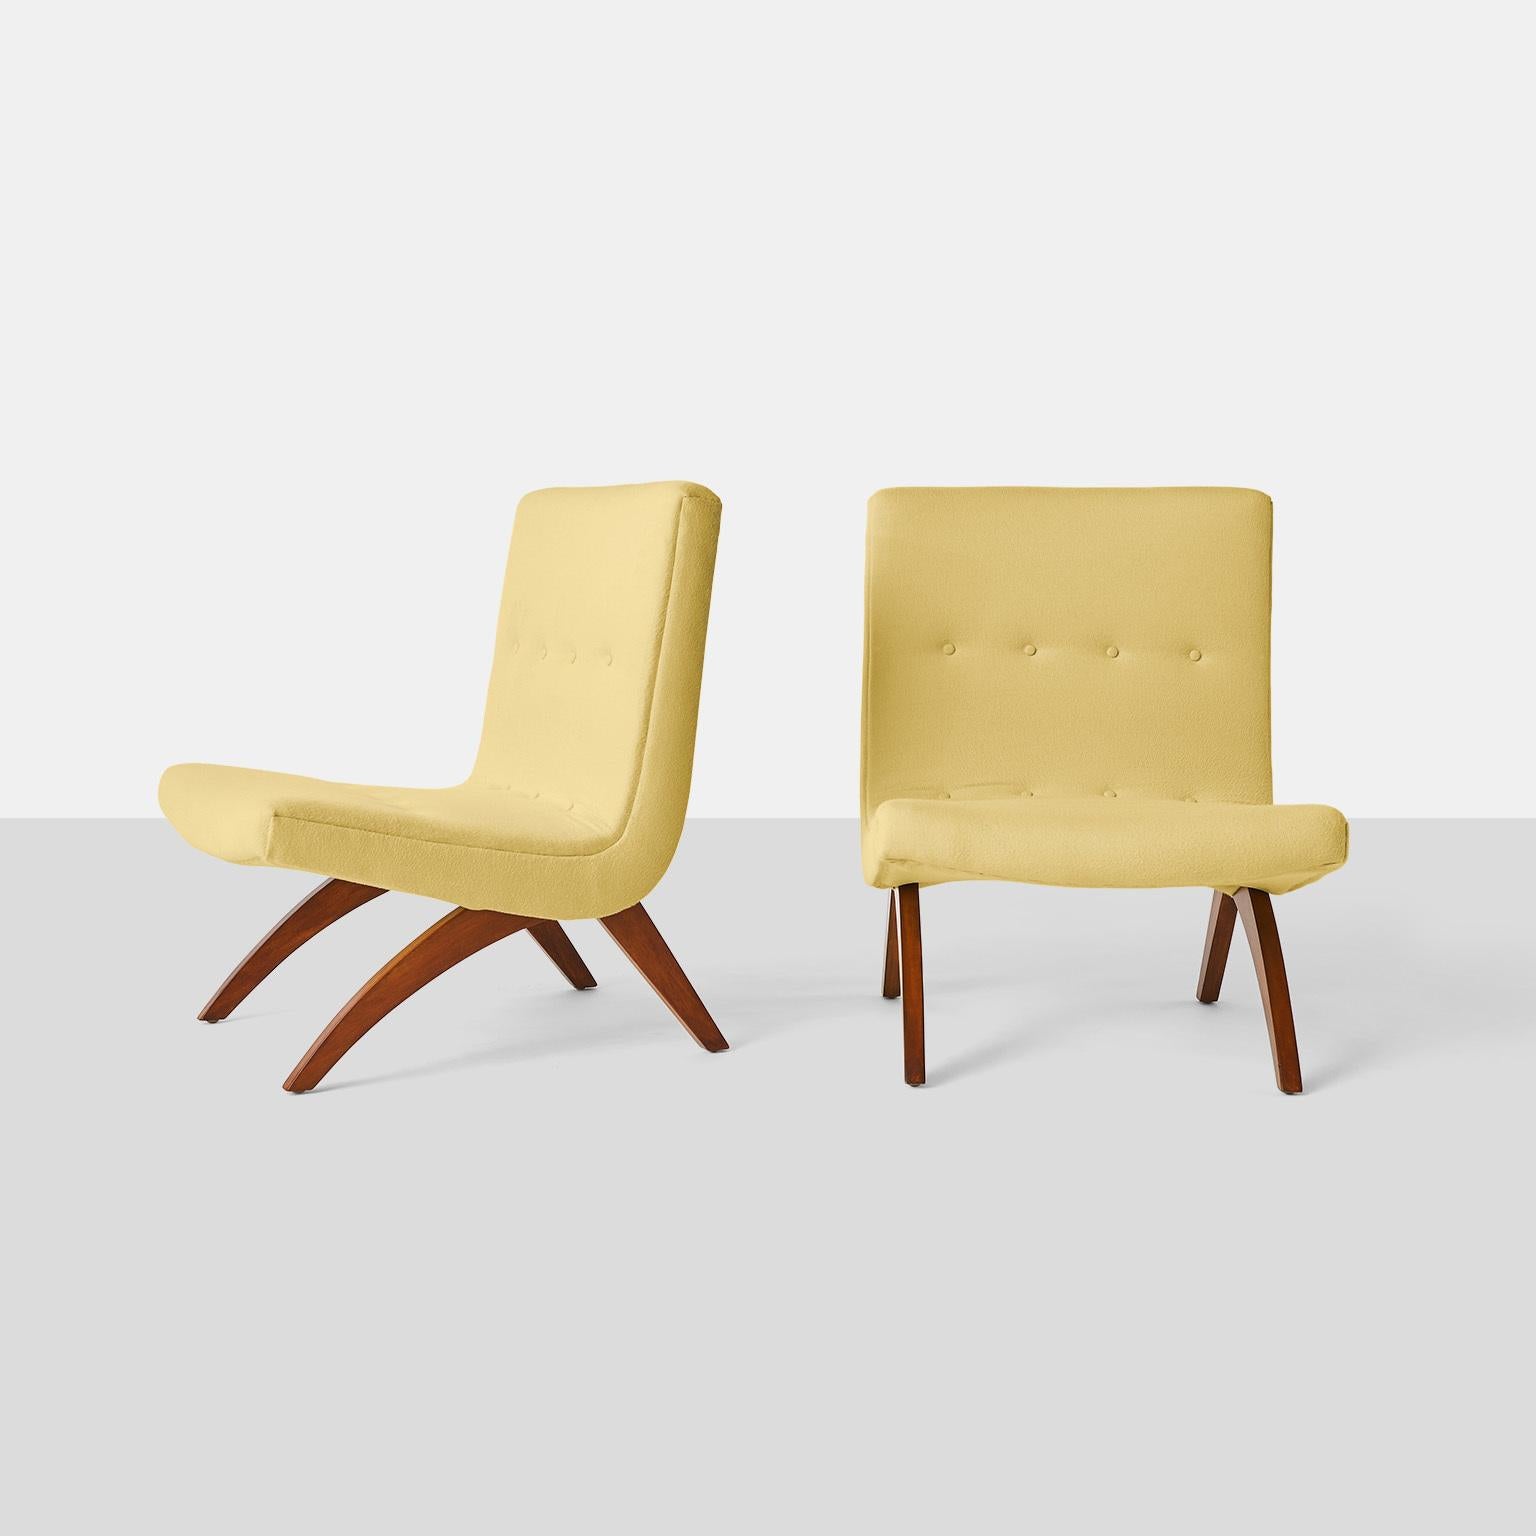 Milo Baughman scoop chairs
A pair of early scoop chair by Milo Baughman for Thayer Coggin with legs in walnut. Completely restored in a luxurious Sandra Jordan Prima Alpaca fabric in color Sunshine.
USA, circa 1950s.